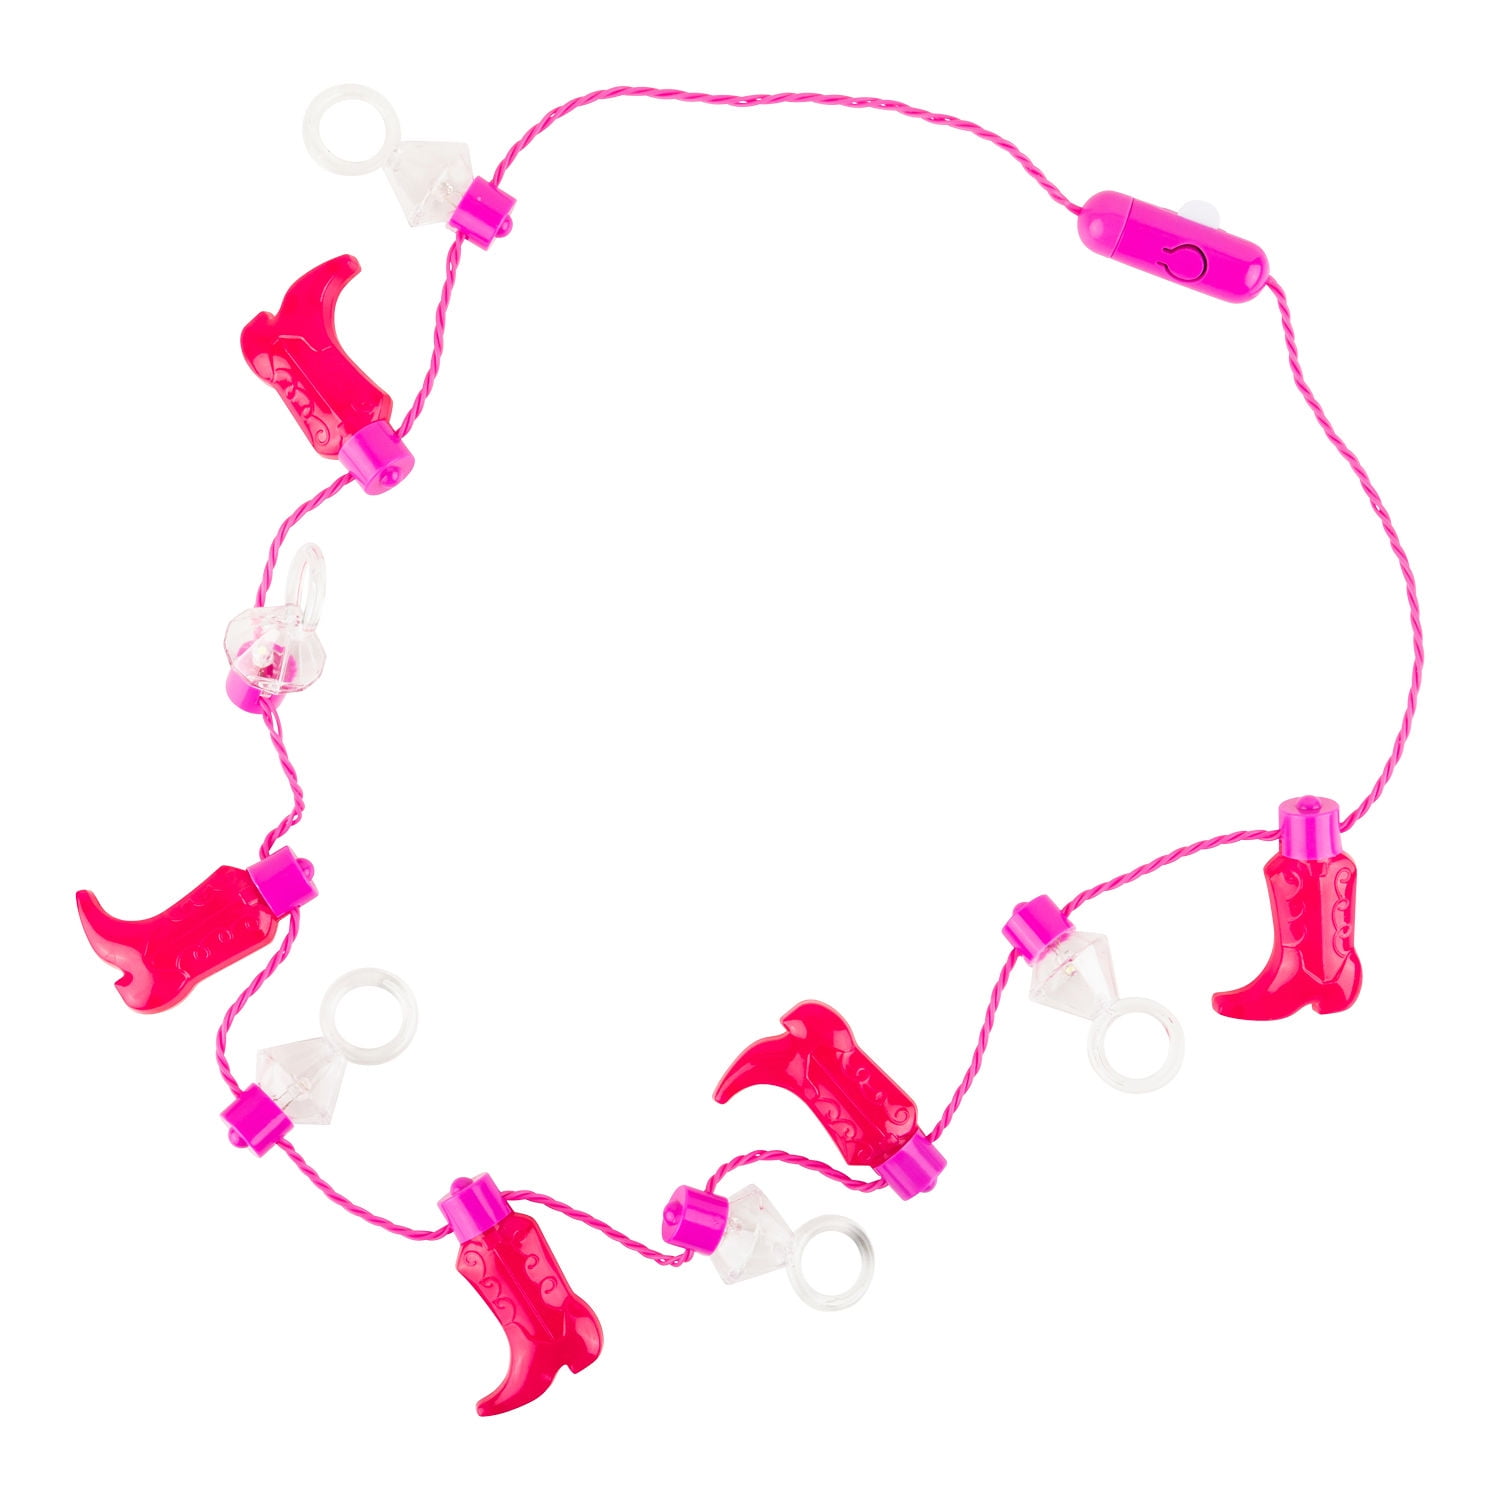 Light Up Flashing Diamond Boots Necklace 4 Pack 676ba7d1 3b00 48f4 9c31 acda6e6367e6.34857b8db98799c5e9ec0eb6013cda60